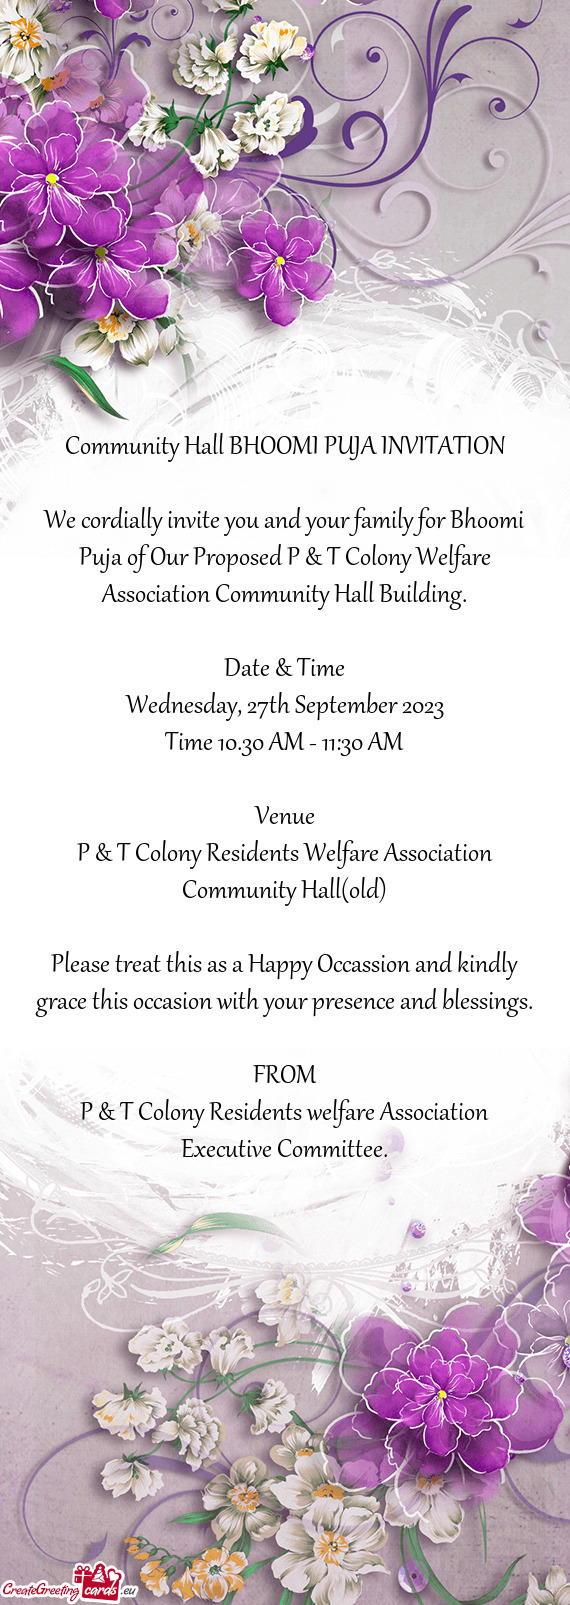 We cordially invite you and your family for Bhoomi Puja of Our Proposed P & T Colony Welfare Associa